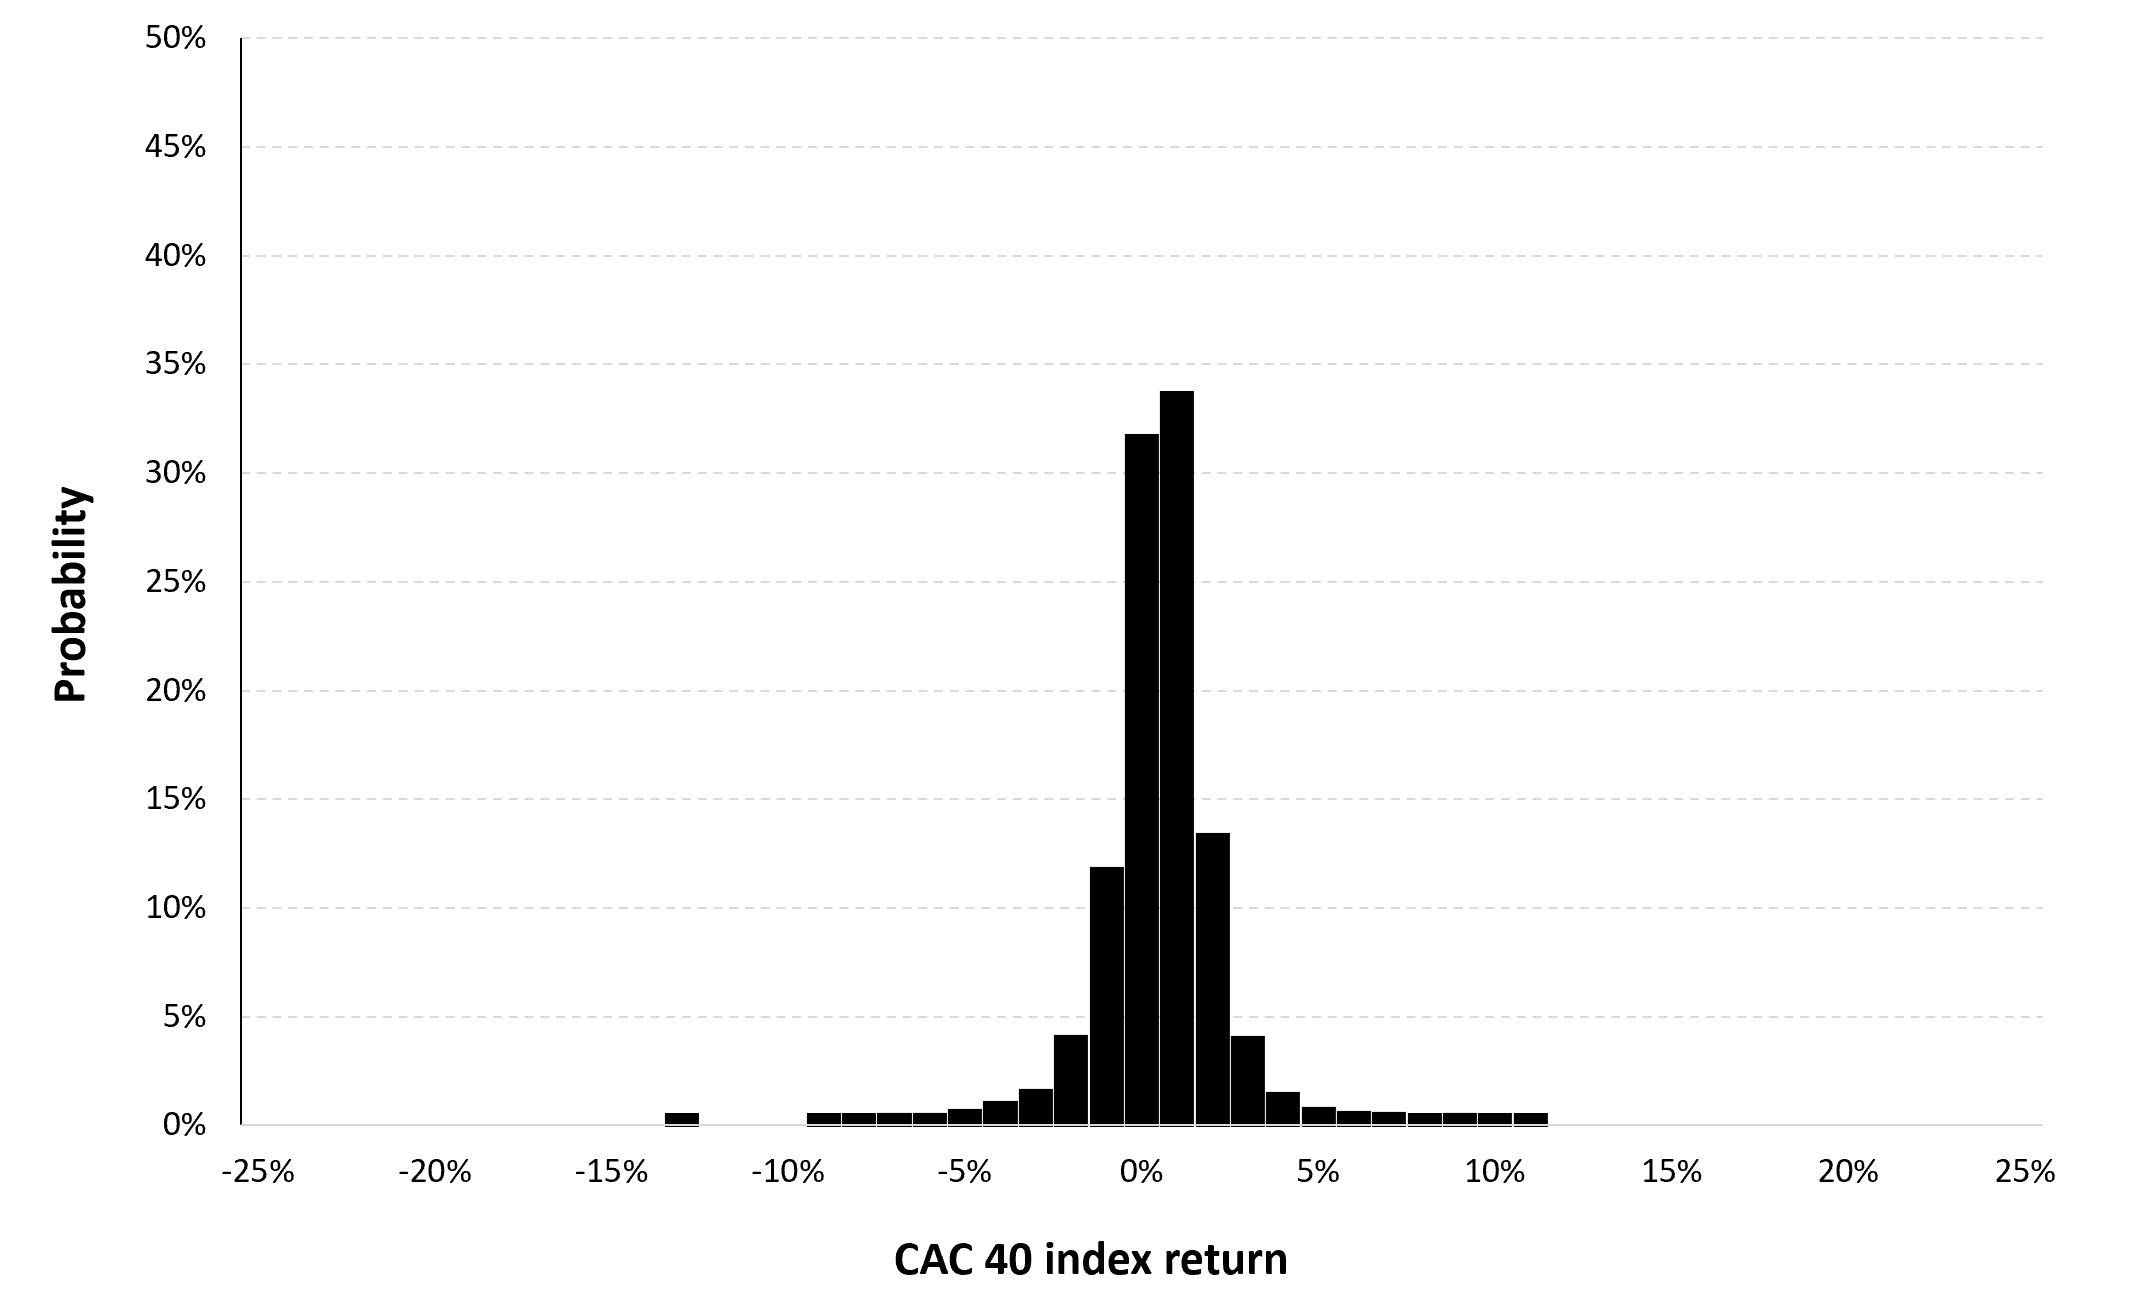 Historical distribution of the daily CAC 40 index returns